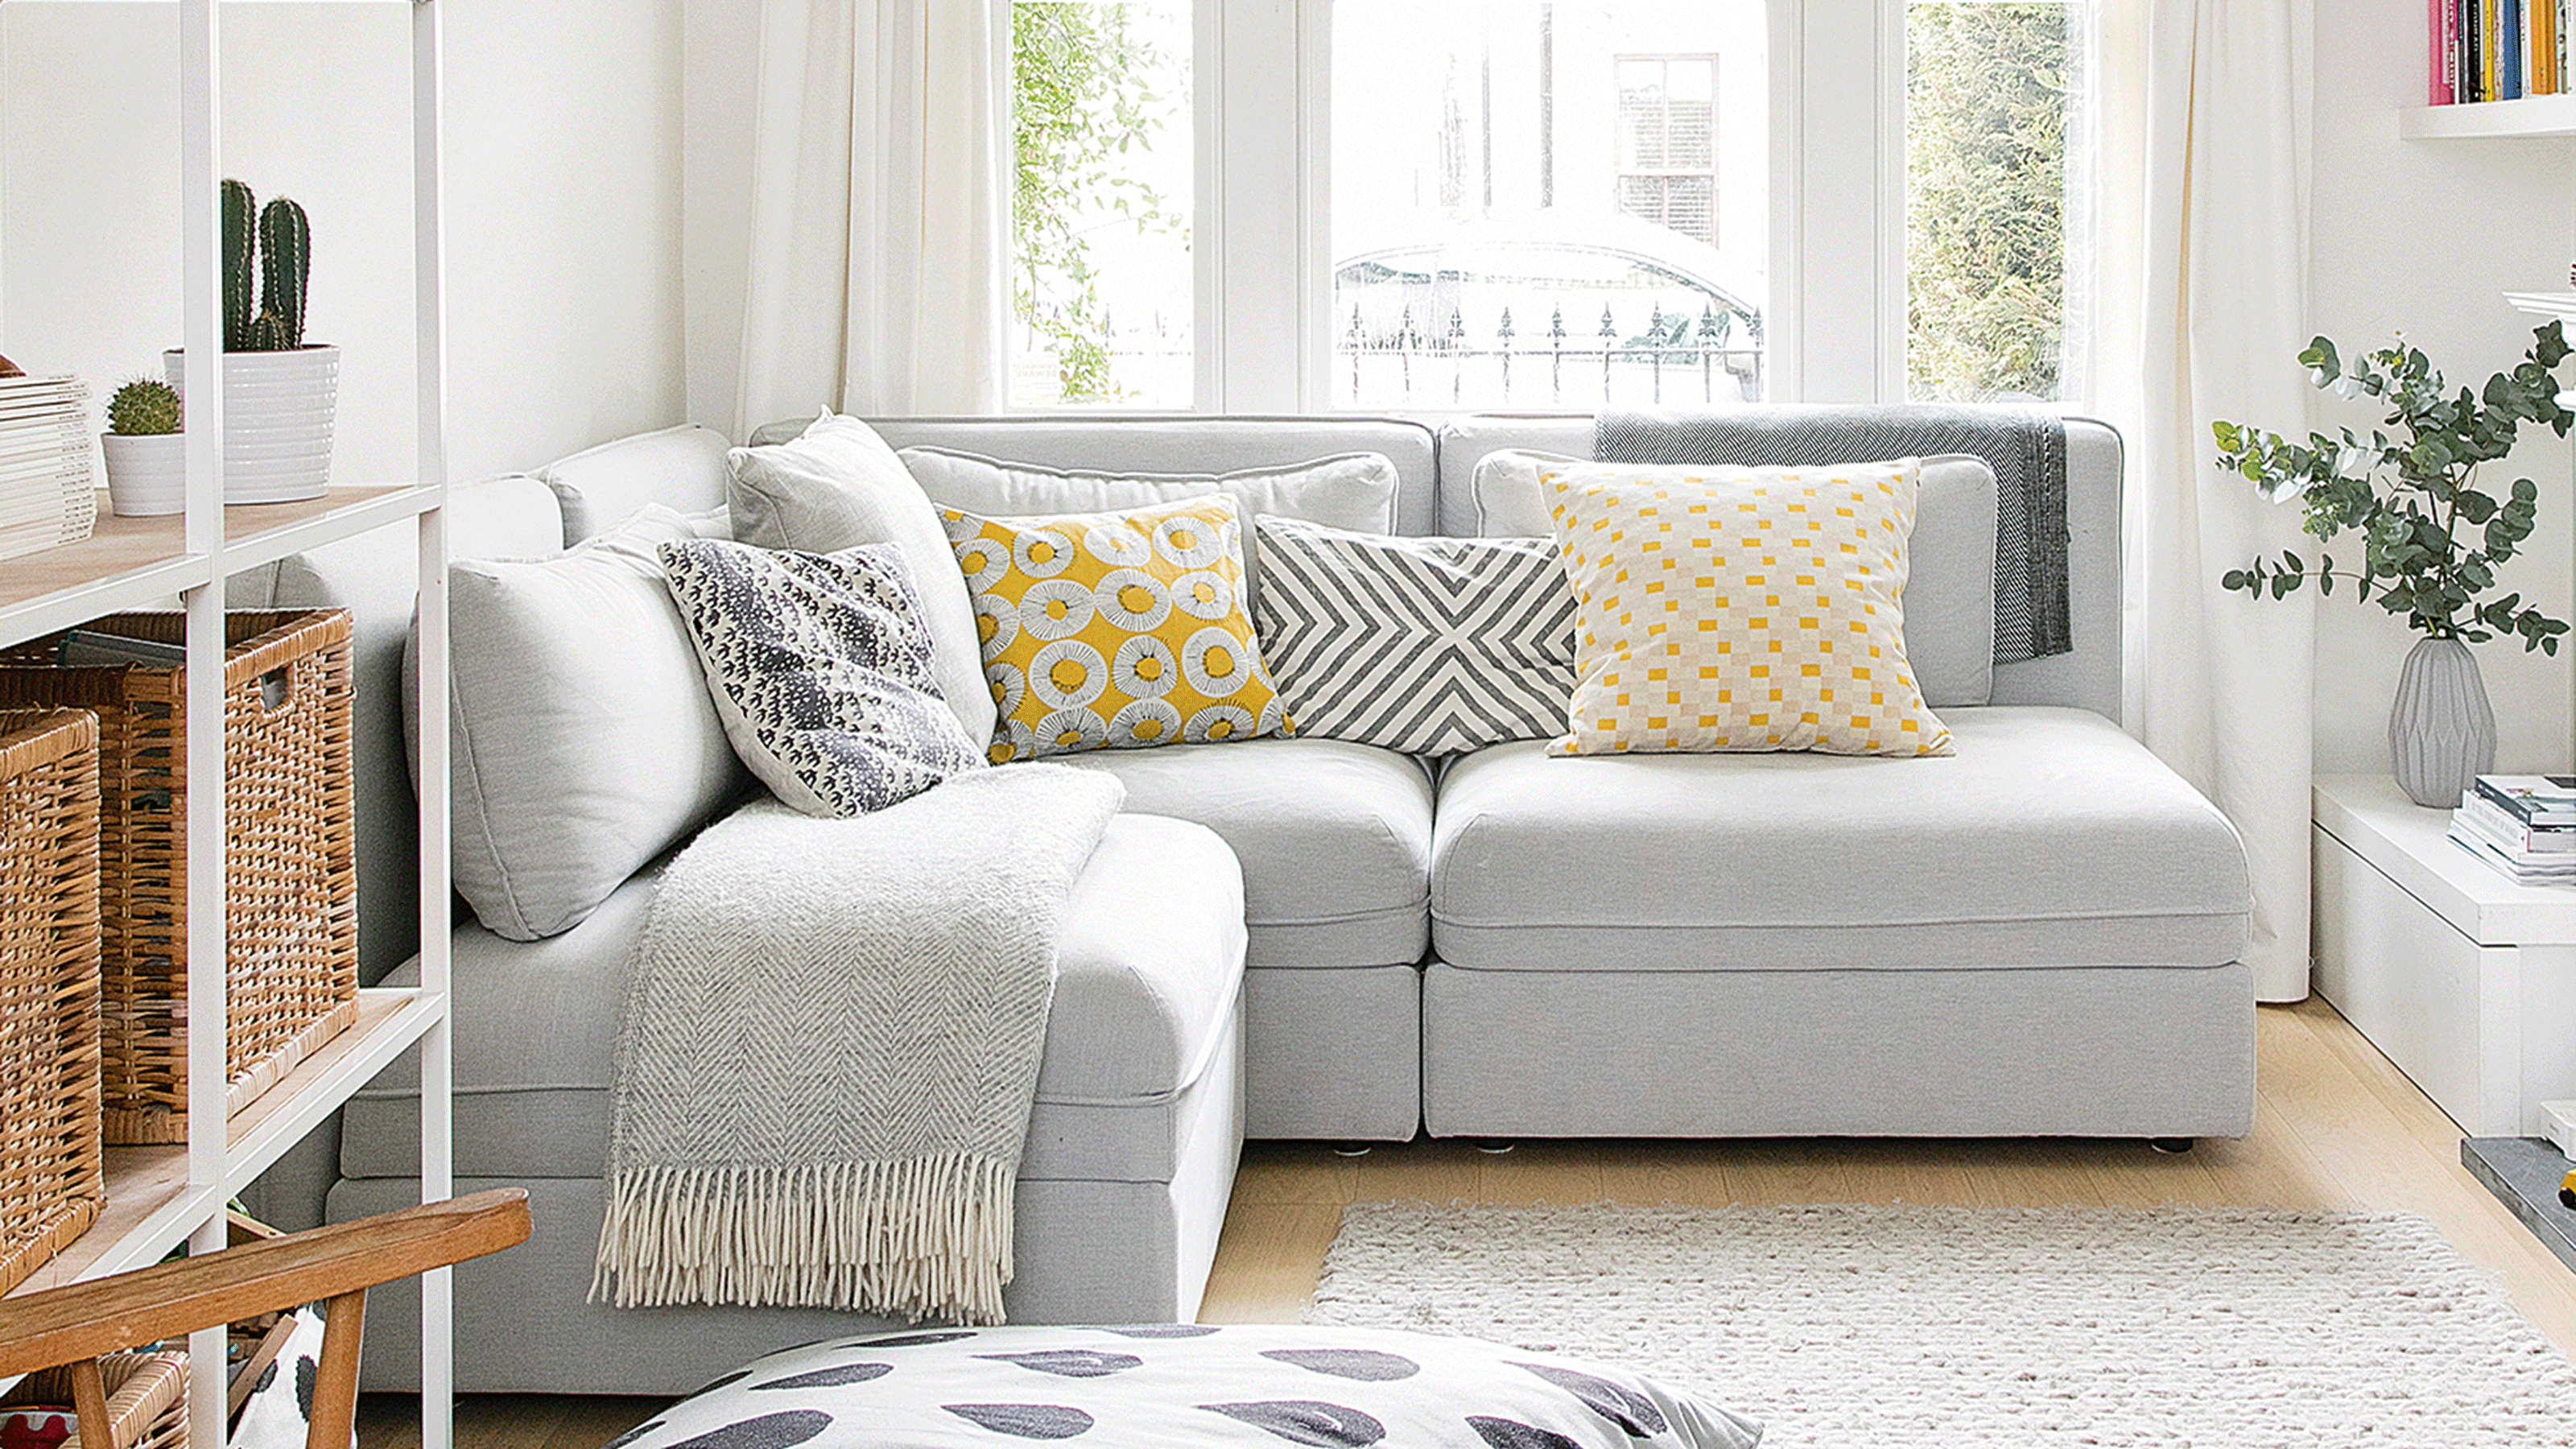 16 Sofa Ideas For Small Living Rooms